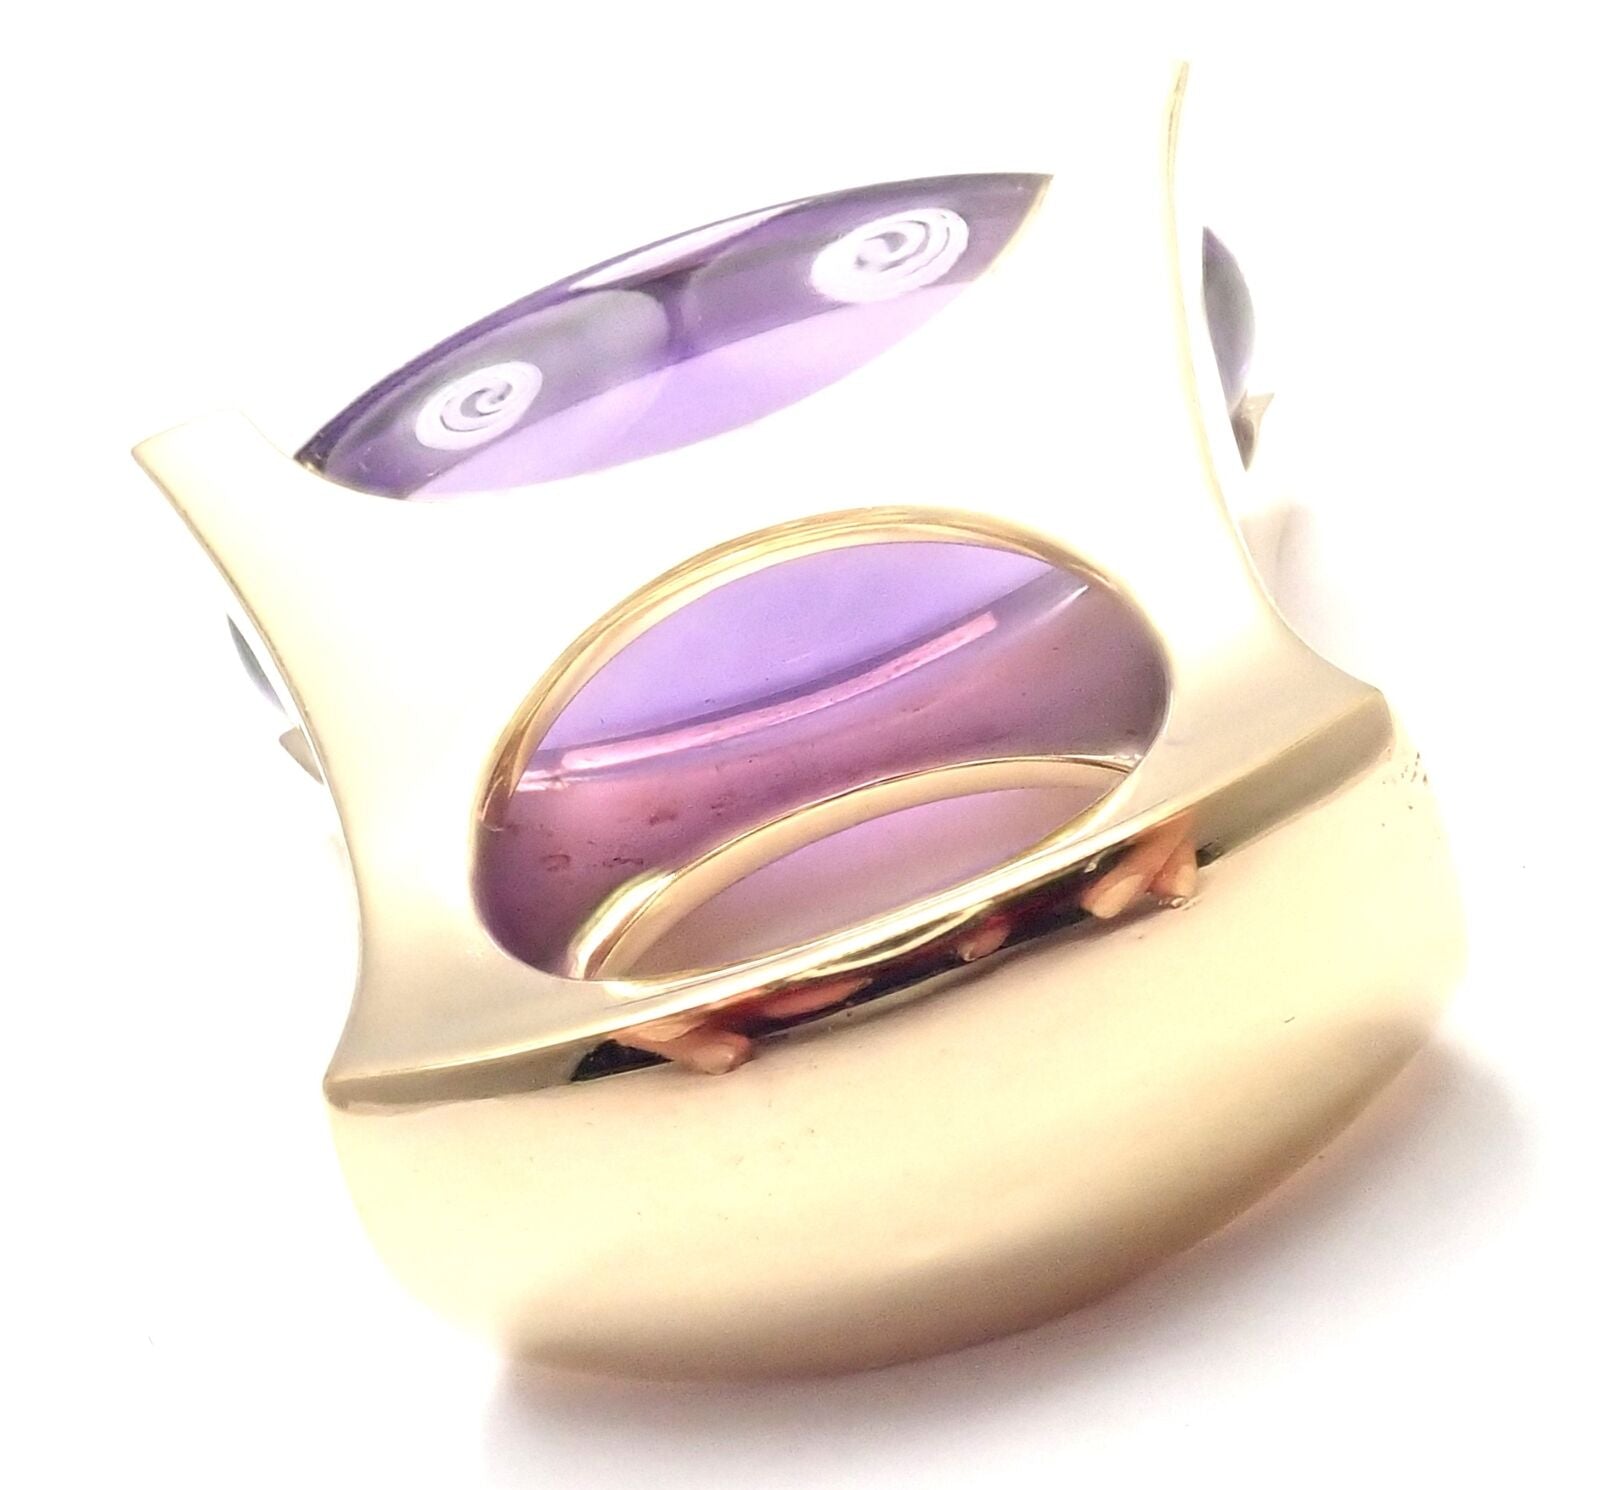 Van Cleef & Arpels Jewelry & Watches:Fine Jewelry:Rings Rare! Authentic Van Cleef & Arpels 18k Yellow Gold Diamond Large Amethyst Ring